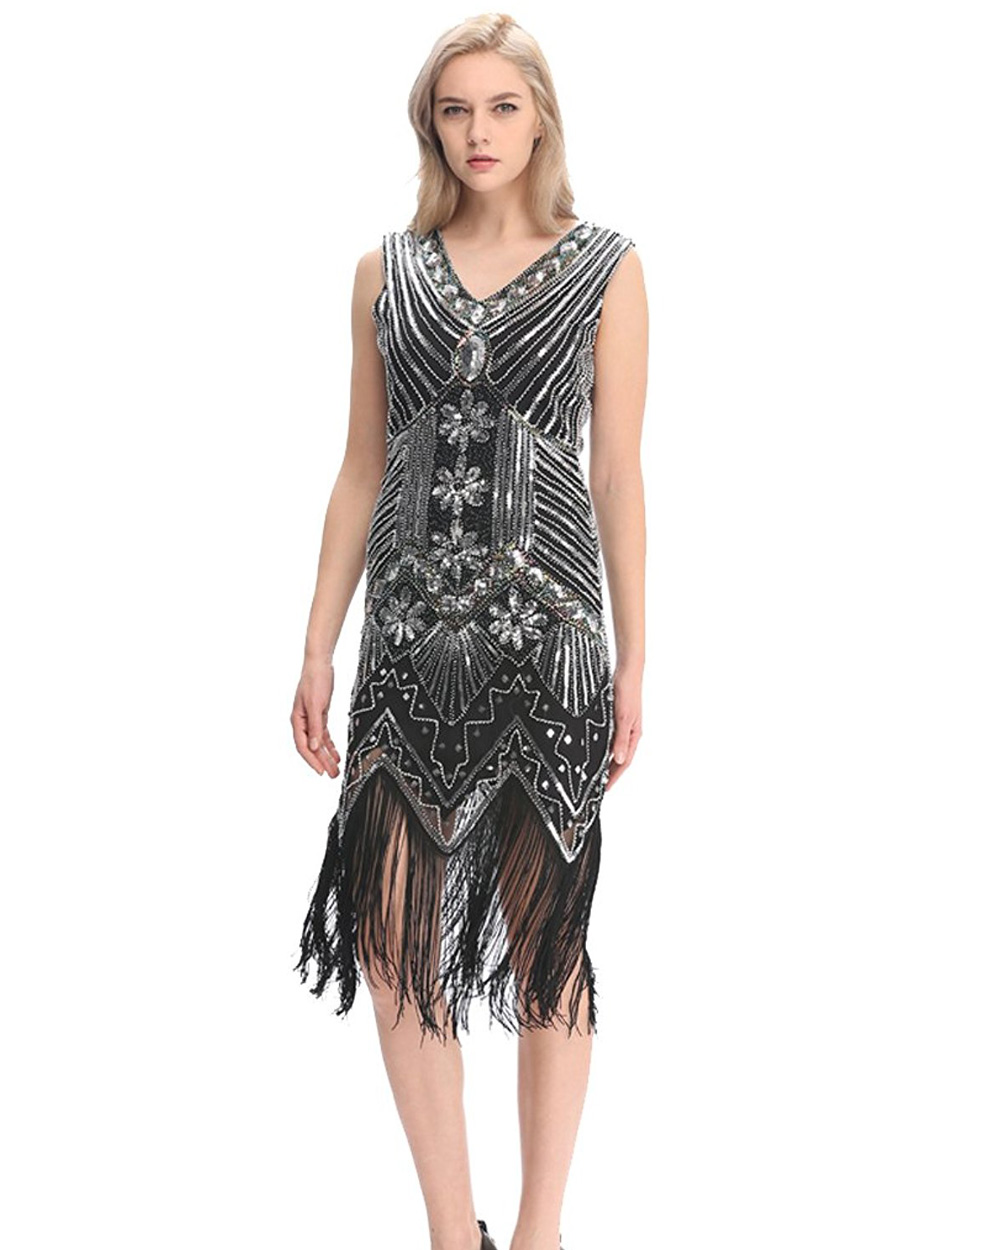 K225A Ladies 1920s Roaring 20s Flapper Costume Sequin Pearls Outfit ...